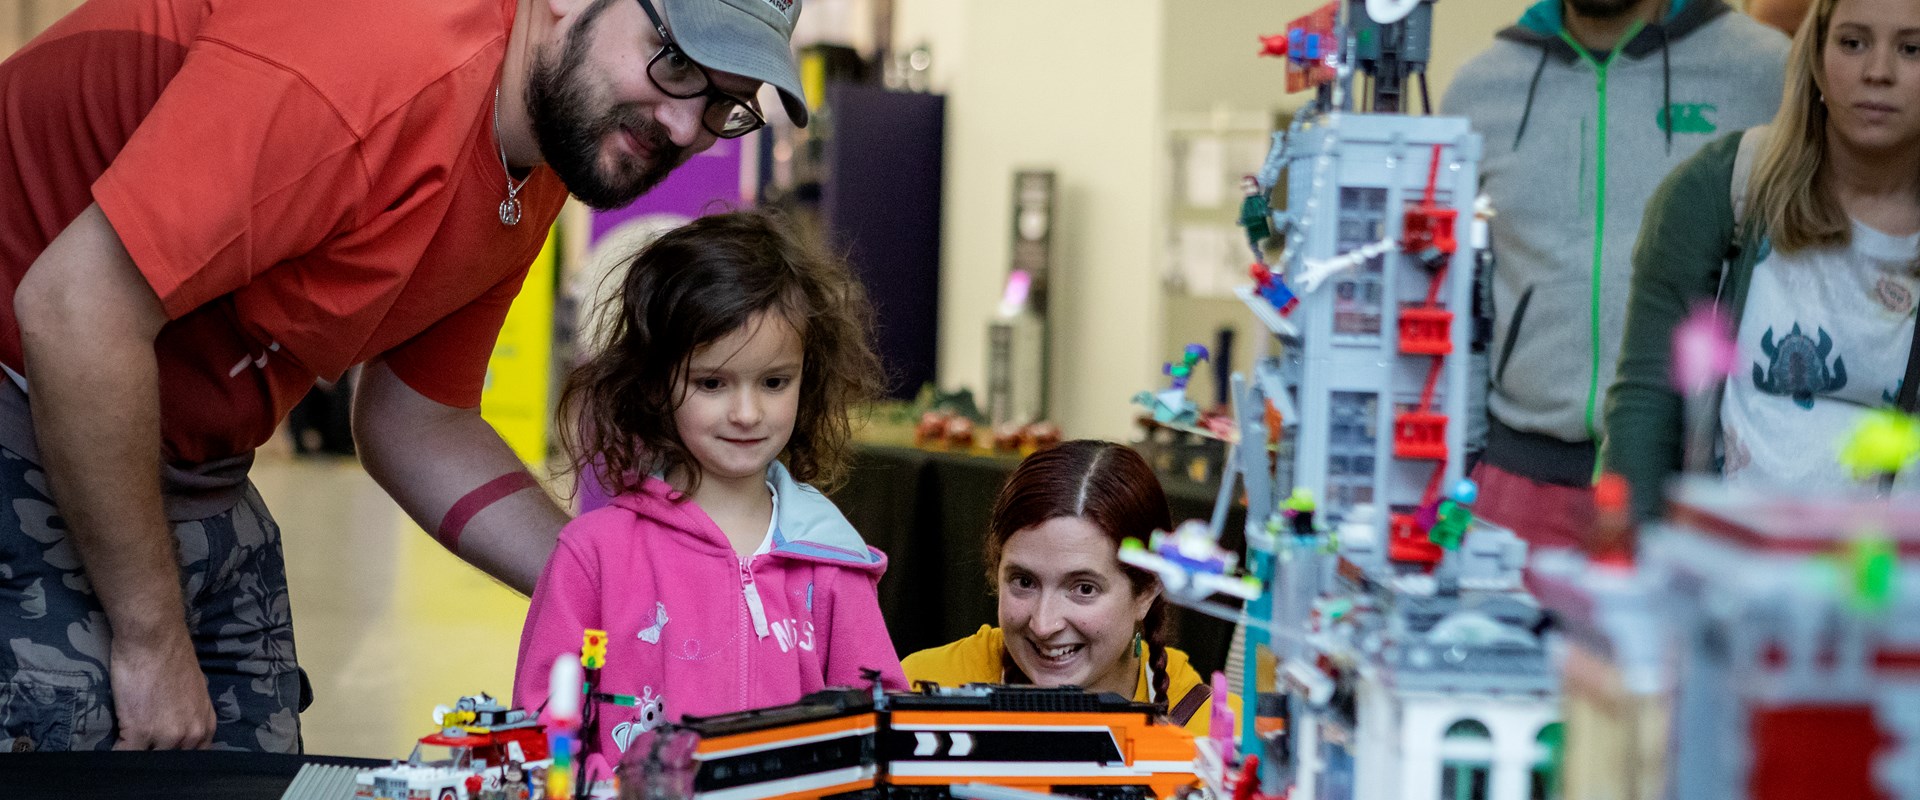 Two adults and a child look at Lego models on a table.